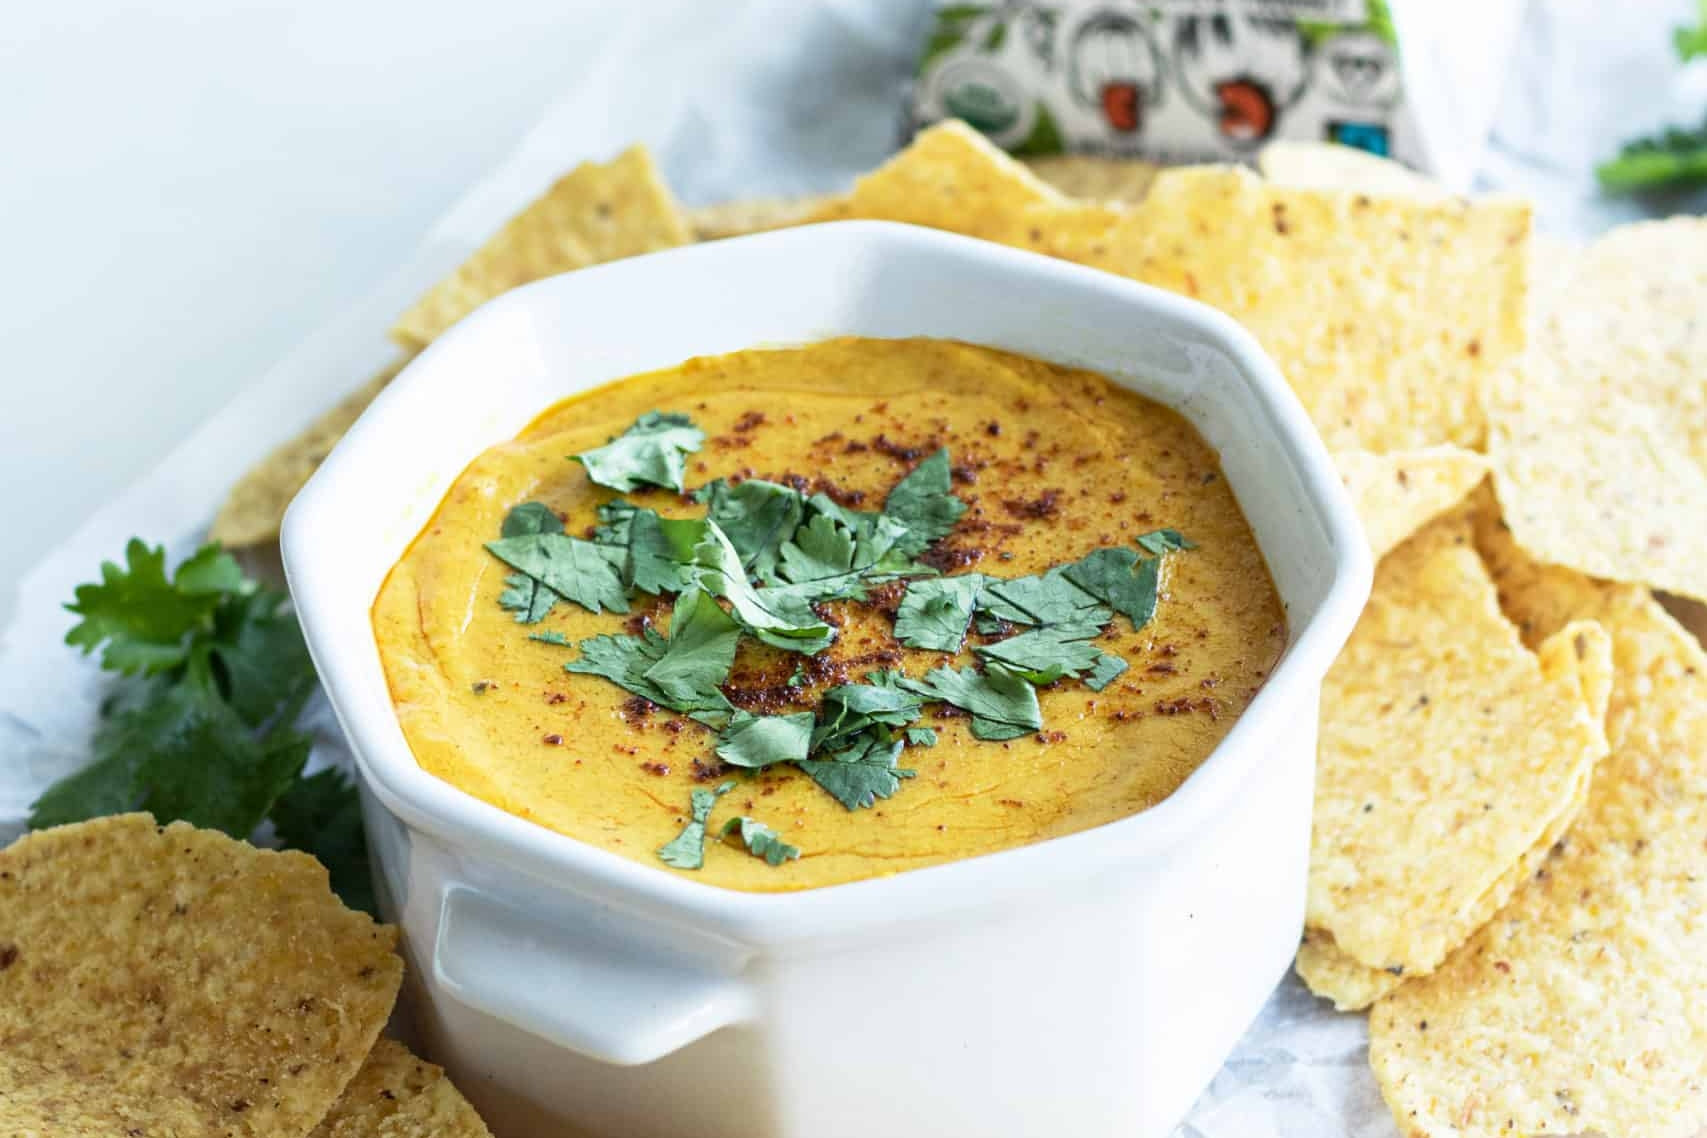 Bowl of vegan nacho cheese dip made with dairy-free chipotle cheddar cheese, topped with fresh cilantro and paprika. Served on a plate with tortilla chips and a box of dairy-free chipotle cheddar cheese.